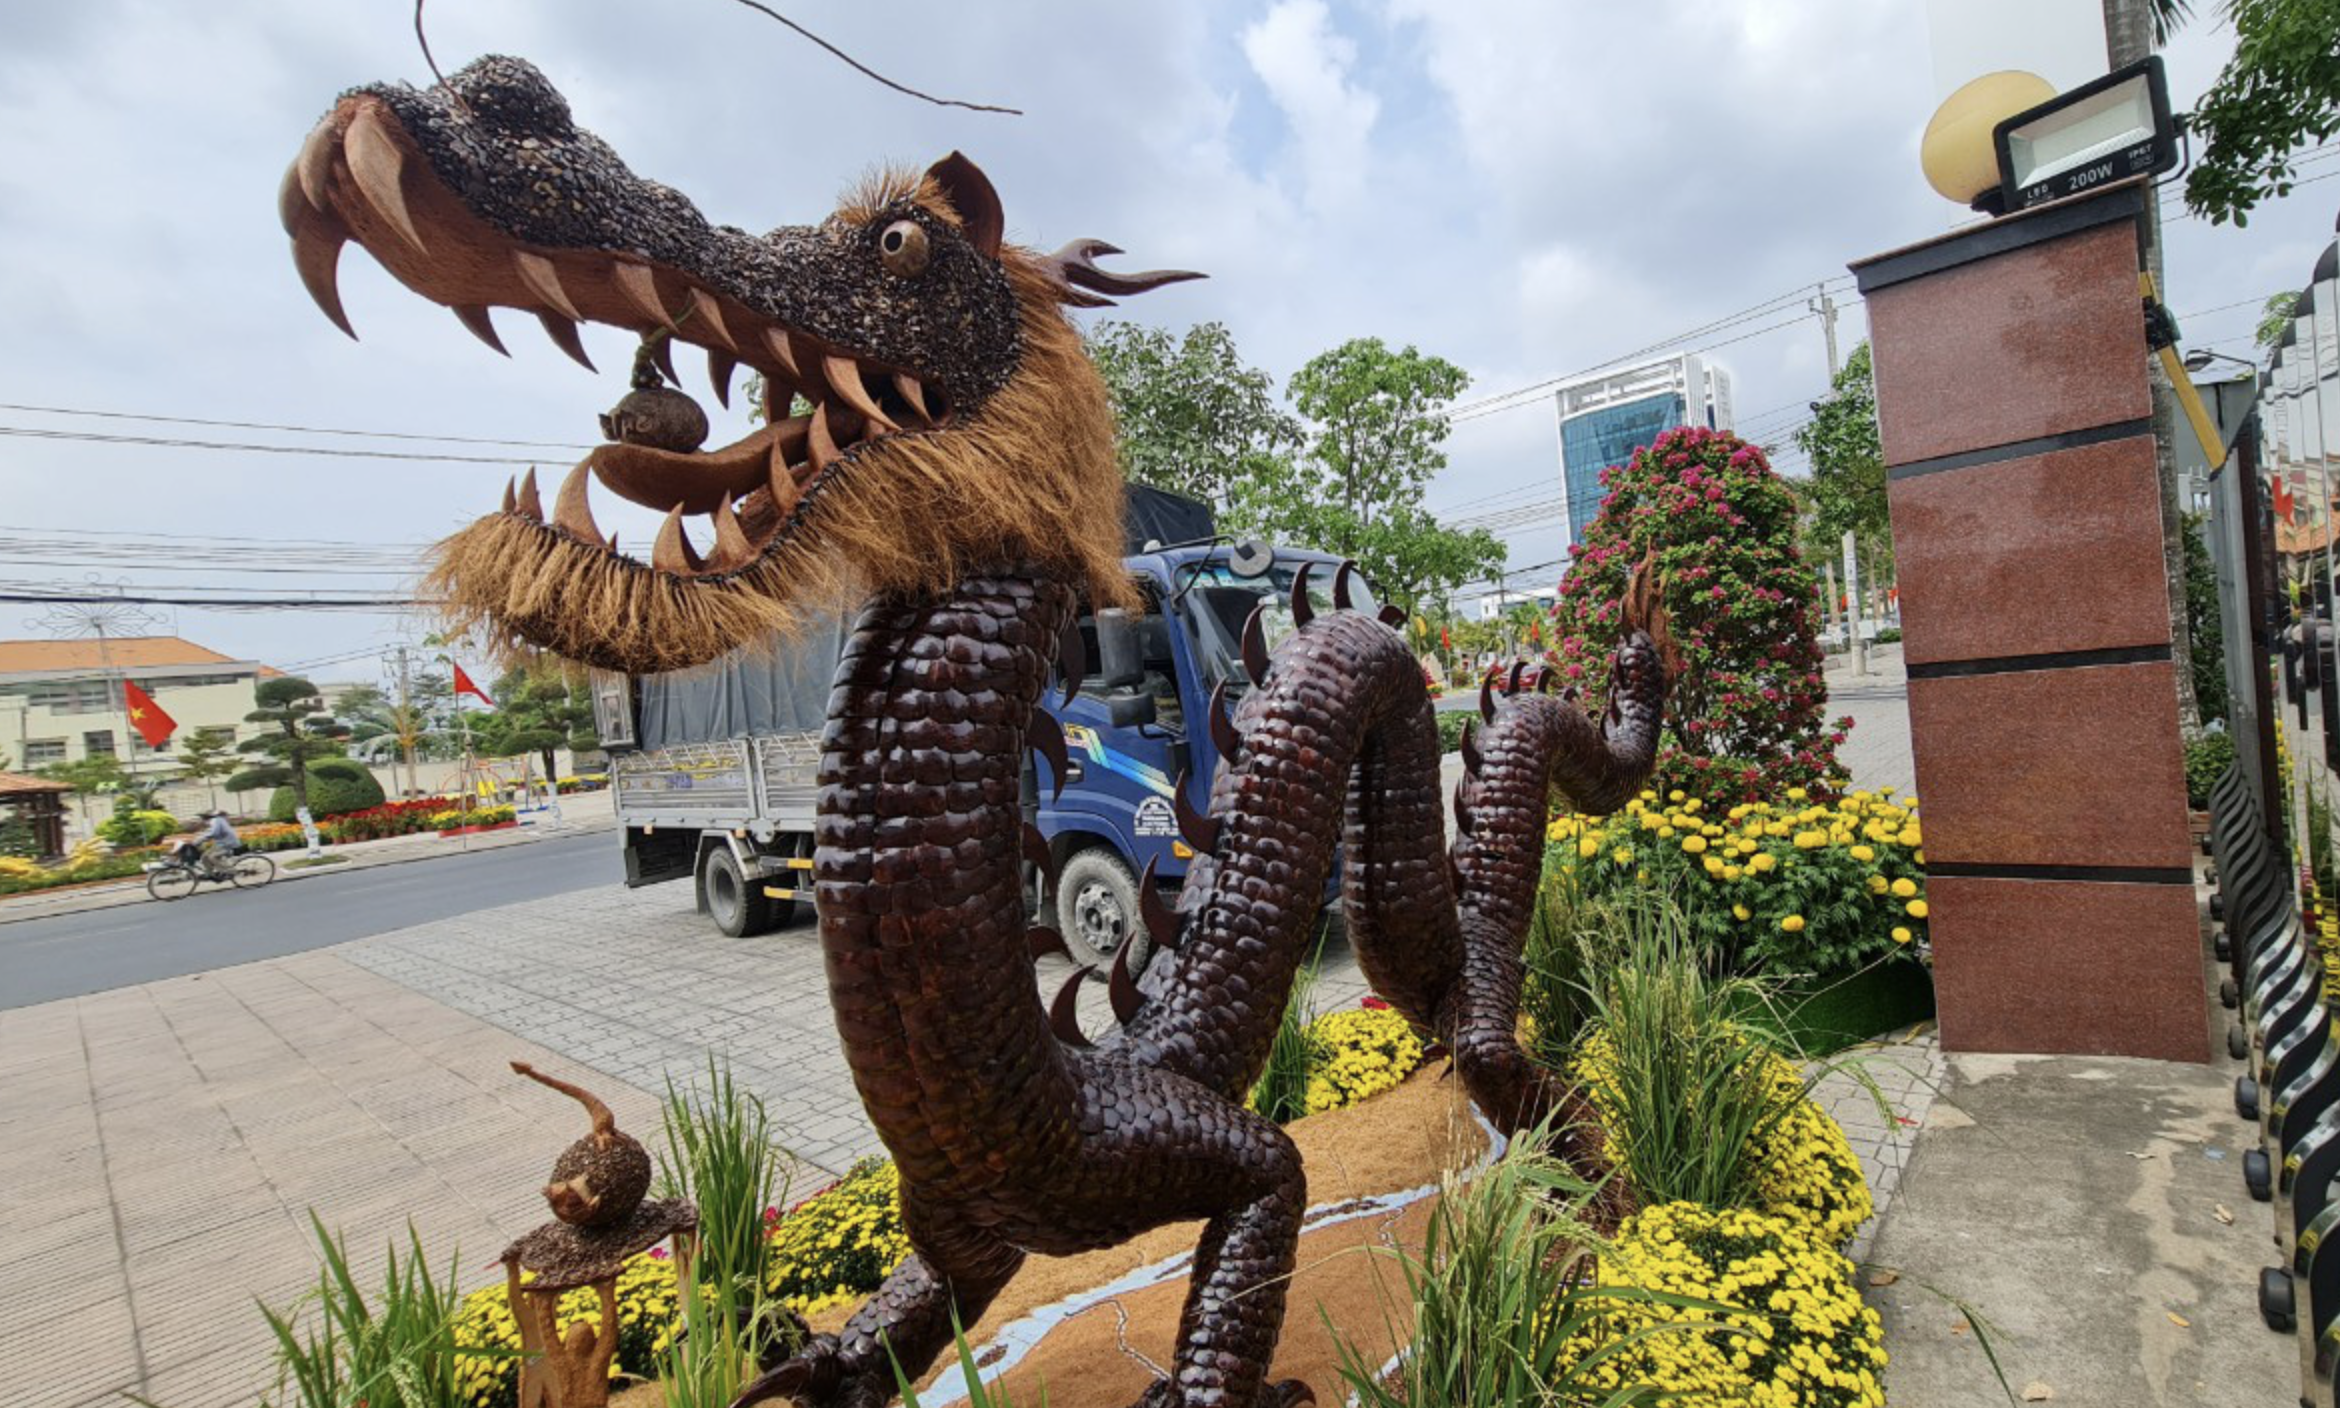 Coconut shell dragon sculpture draws public attention in southern Vietnam